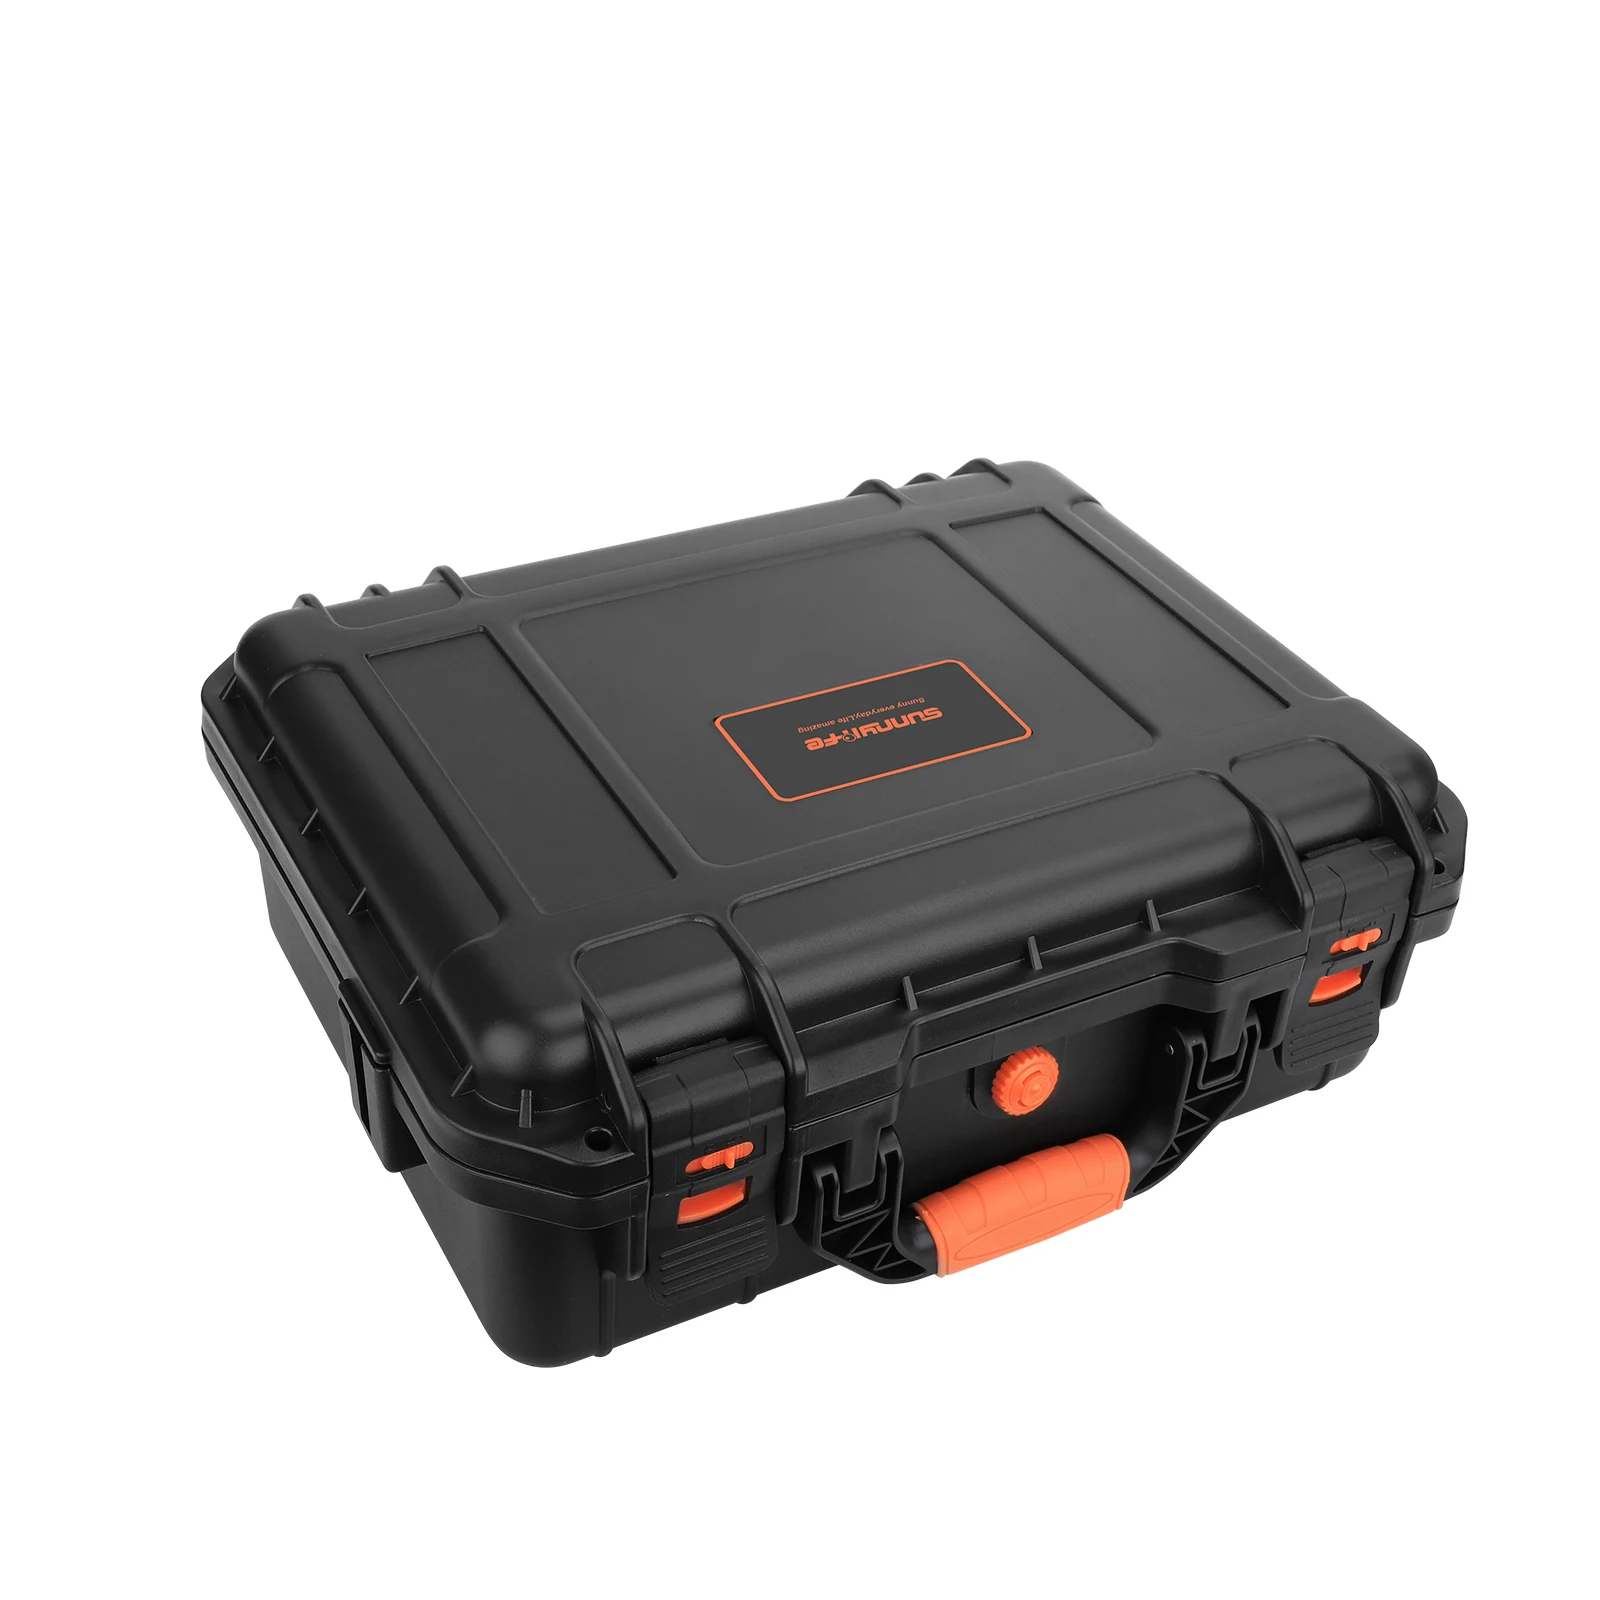 For DJI Mini3 Pro Safety Box Waterproof Storage Bag Drone Outdoor Protective Suitcase enlarge